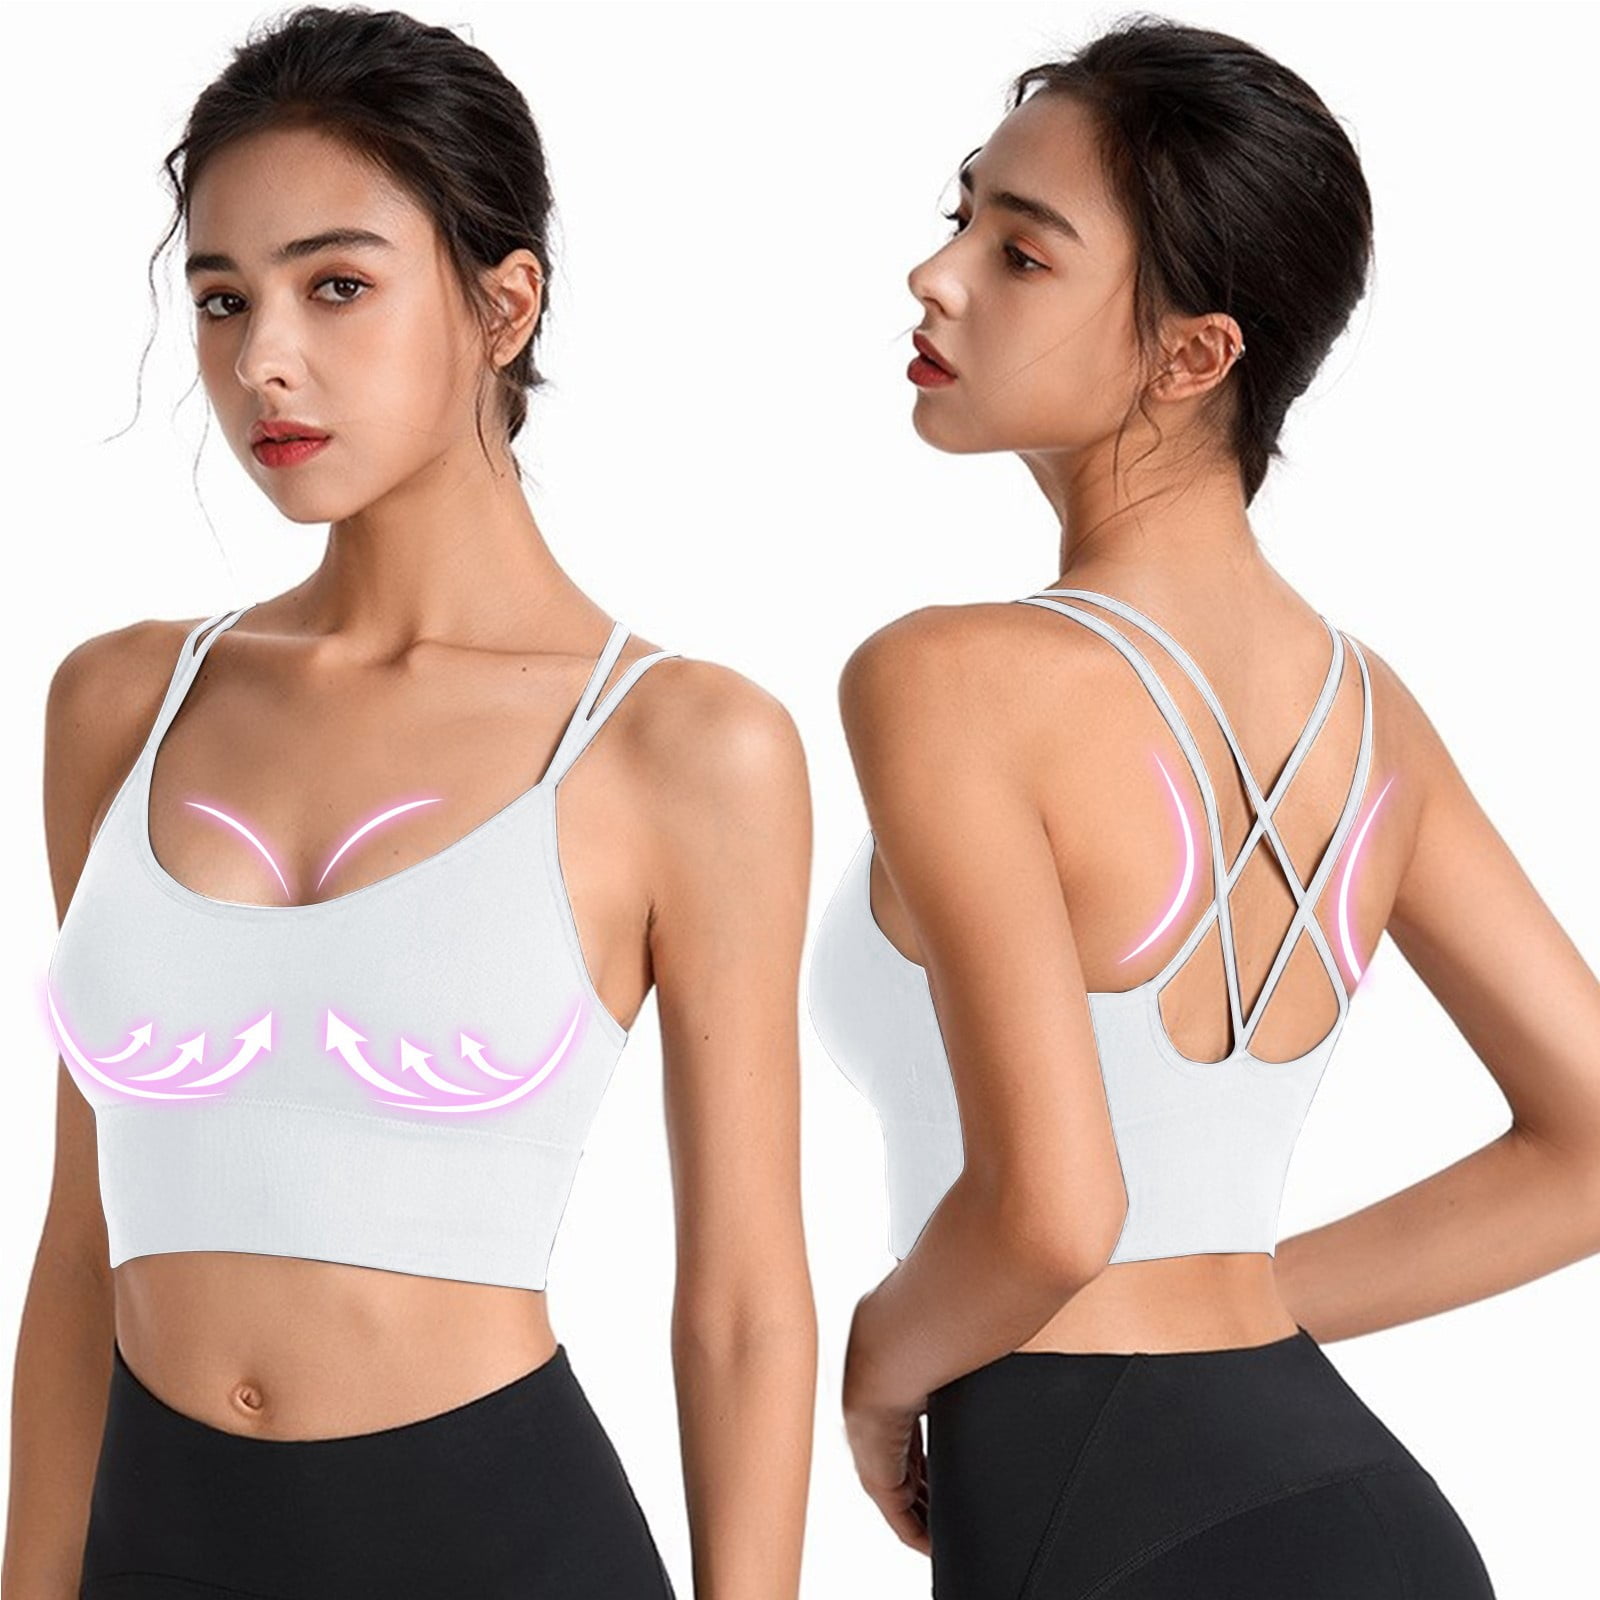 CAICJ98 Bras For Women Yoga Tank Tops for Women Built in Shelf Bra B/C Cups  Strappy Back Activewear Workout Compression Tops White,L 